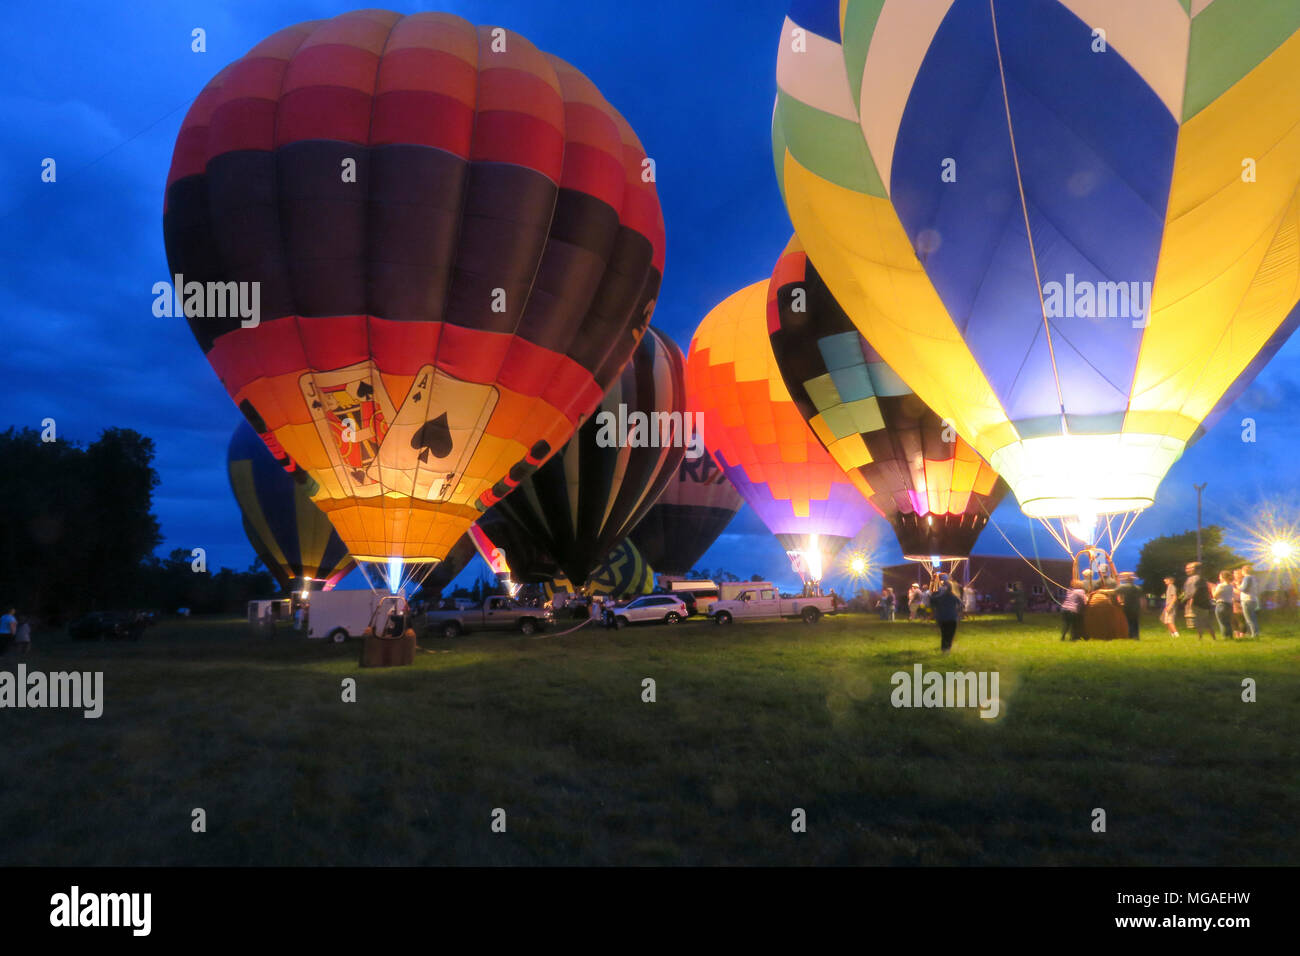 Hot air balloon glow with flames at a Connecticut balloon festival evening balloon glow Stock Photo